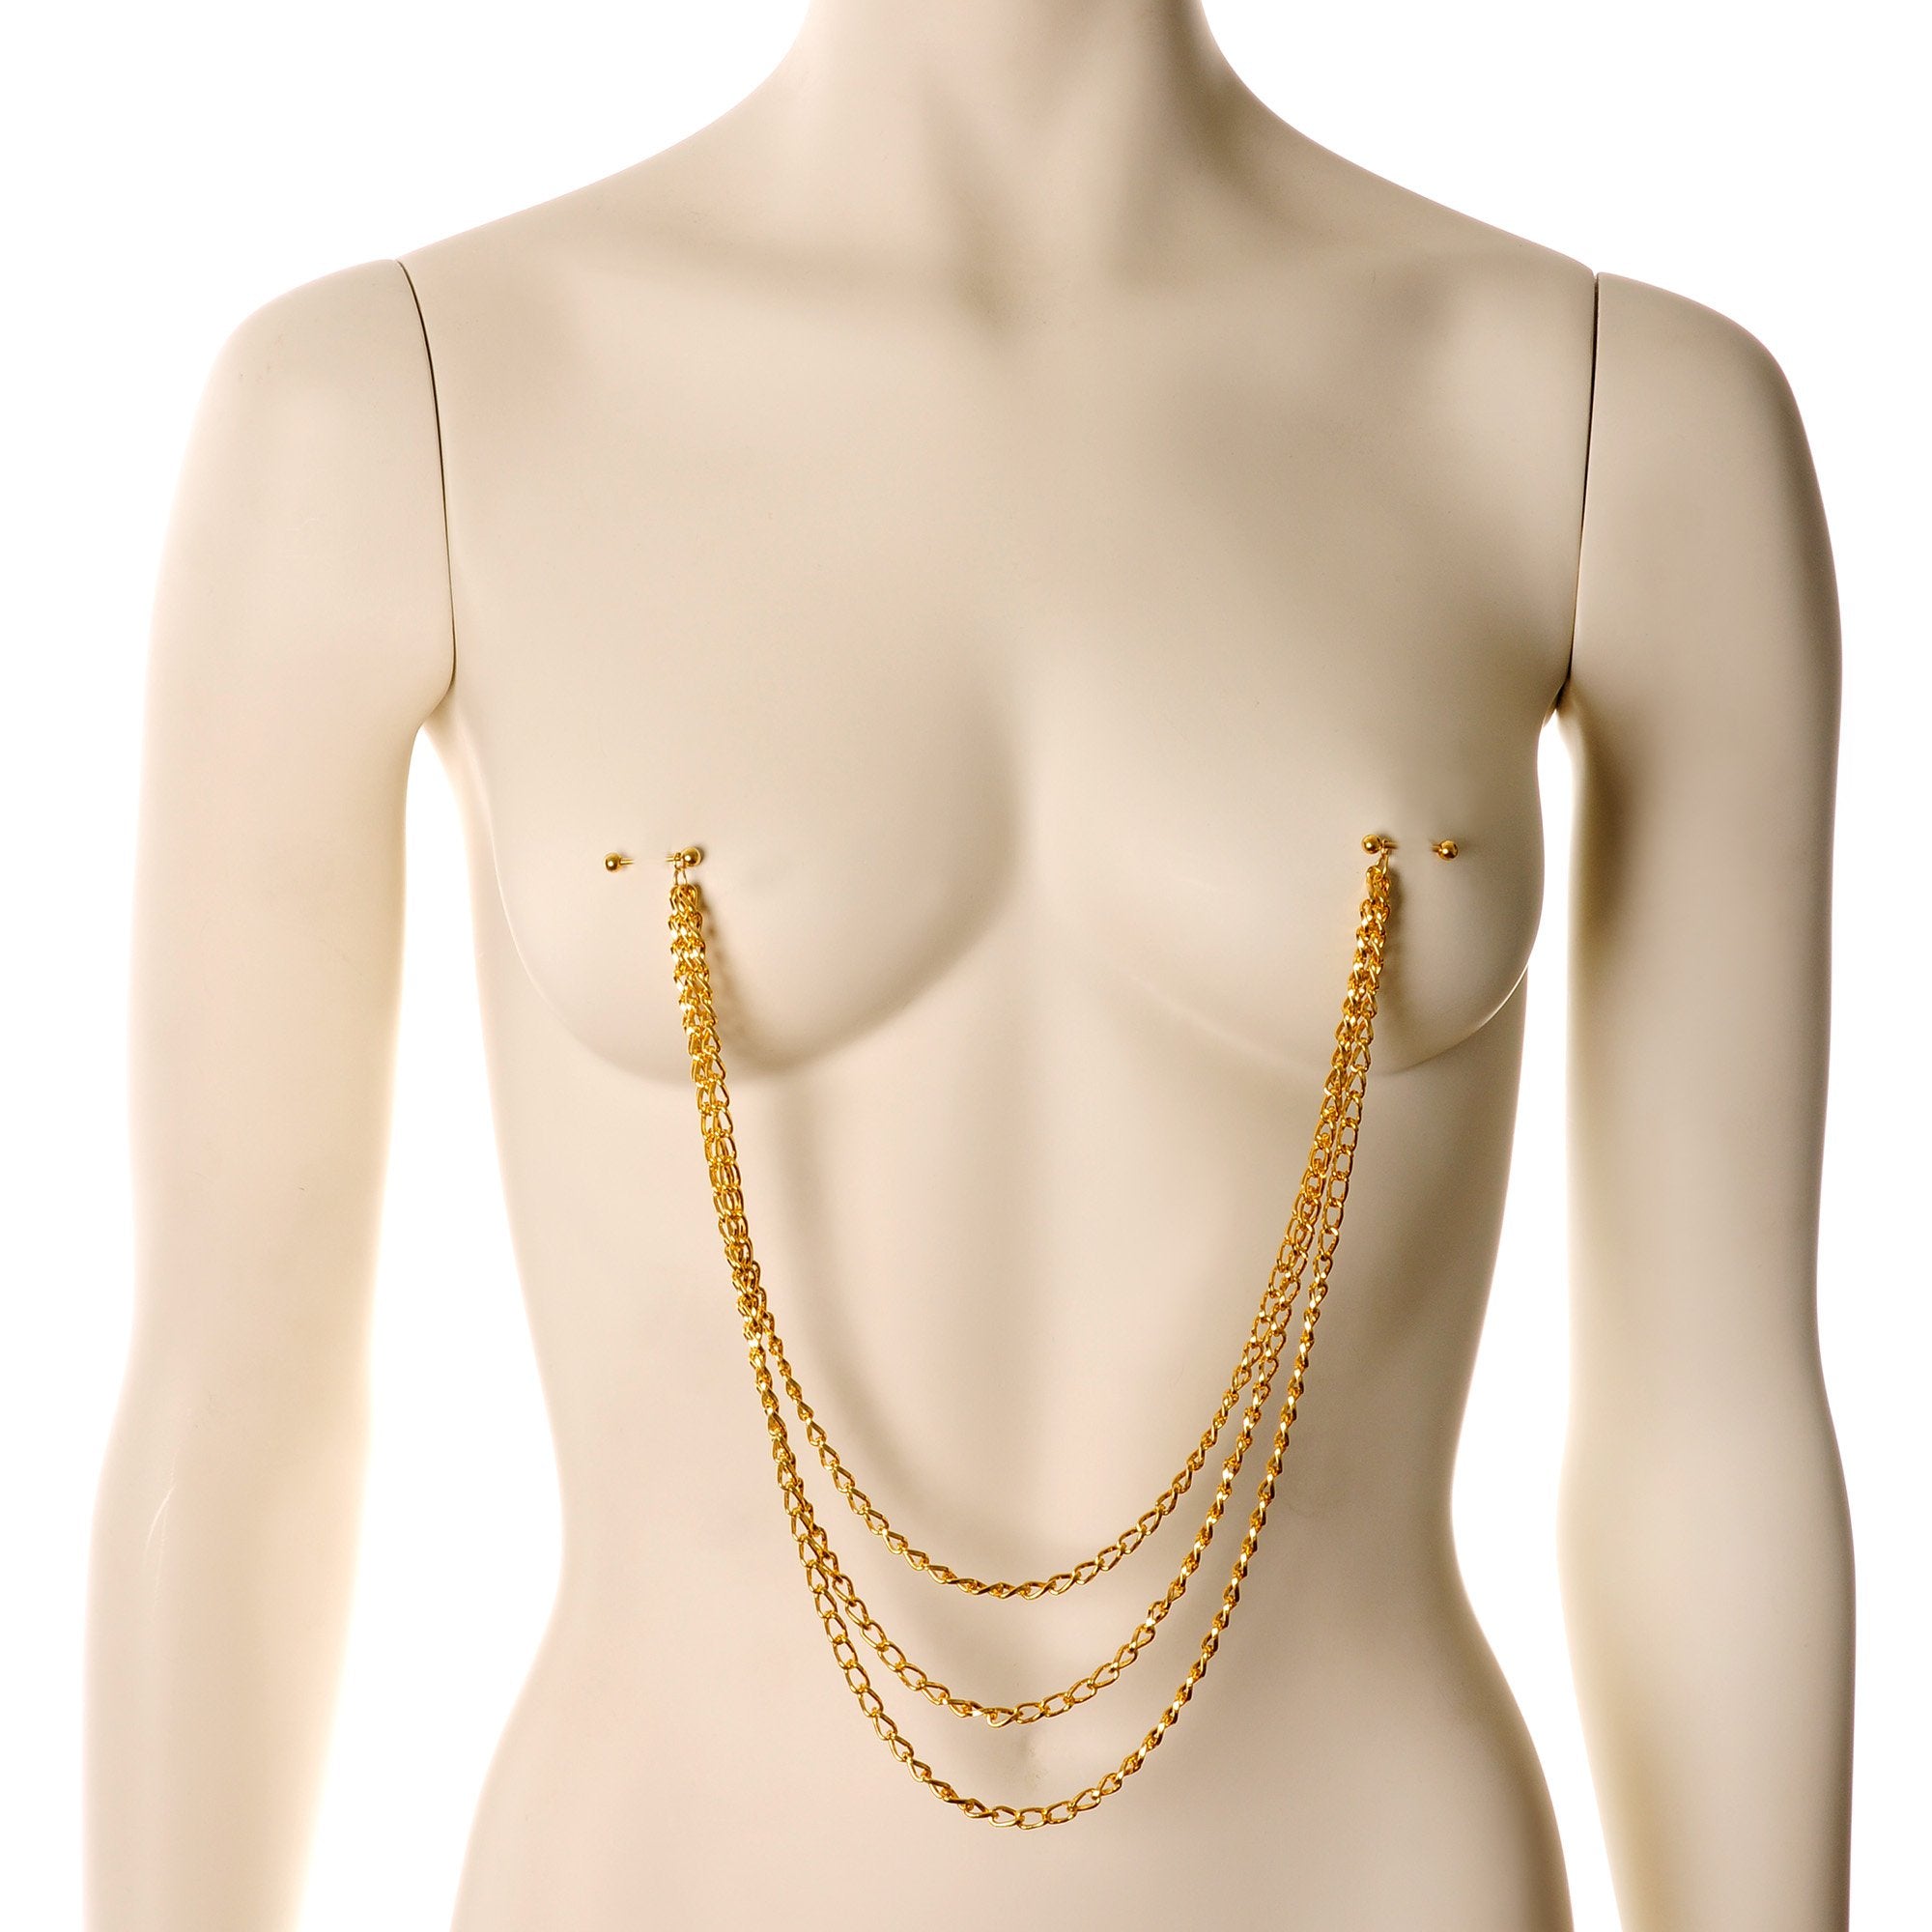 5/8 Handcrafted Electro Plated Triple Threat Dangle Nipple Chain